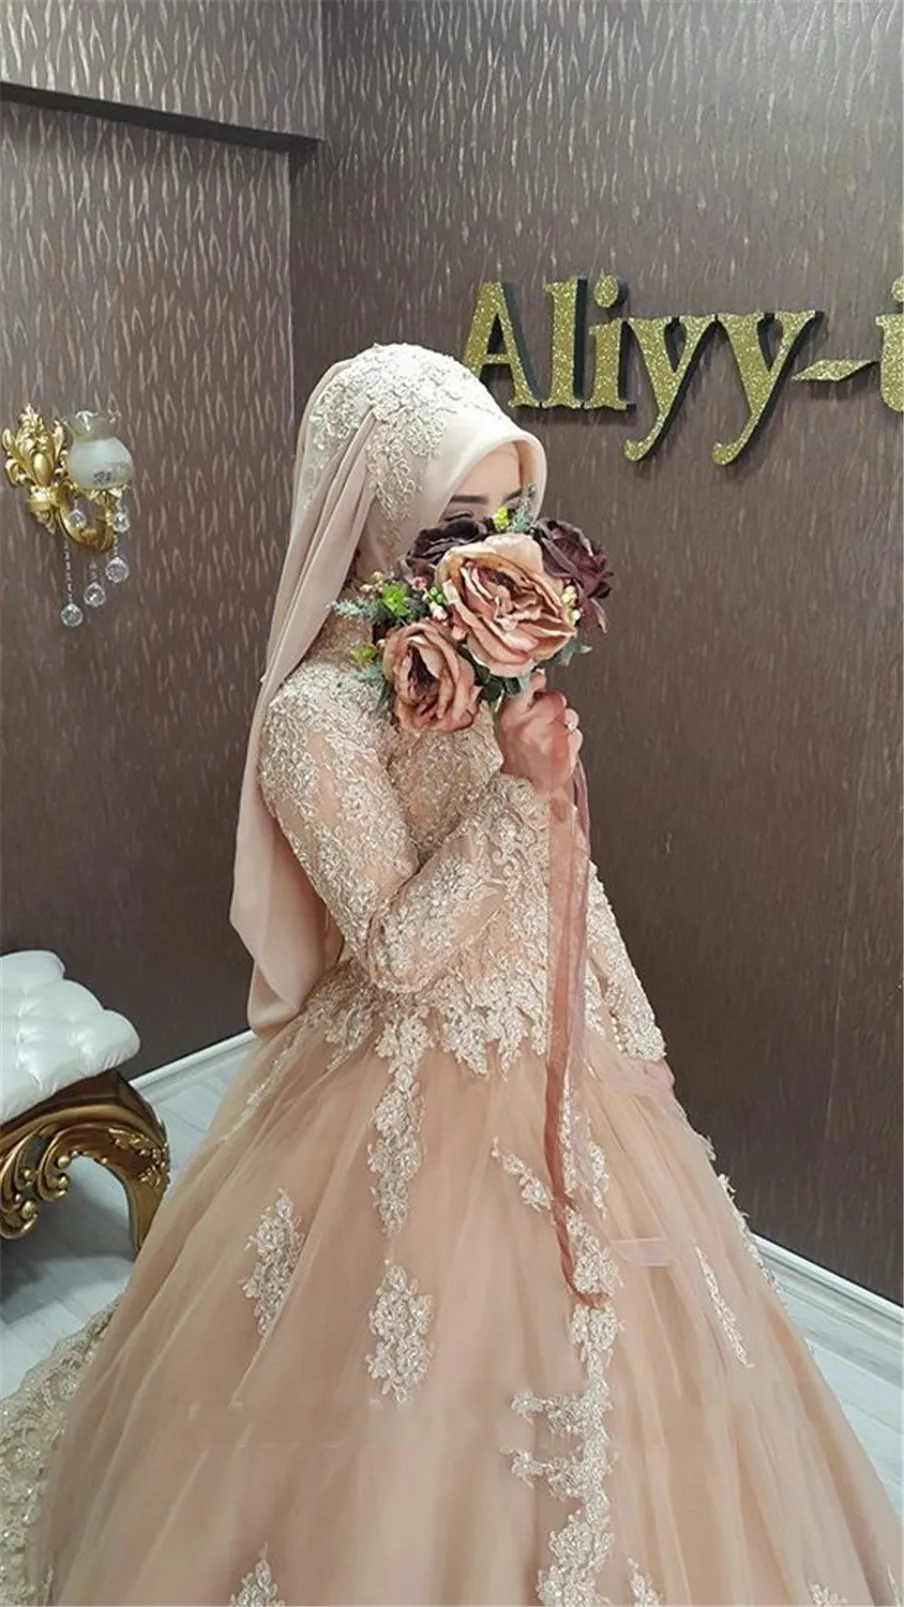 Long Sleeve Champagne Lace Applique High Neckline Muslim Wedding Gowns Islamic Wedding Dress With Hihab Robe De Mariage